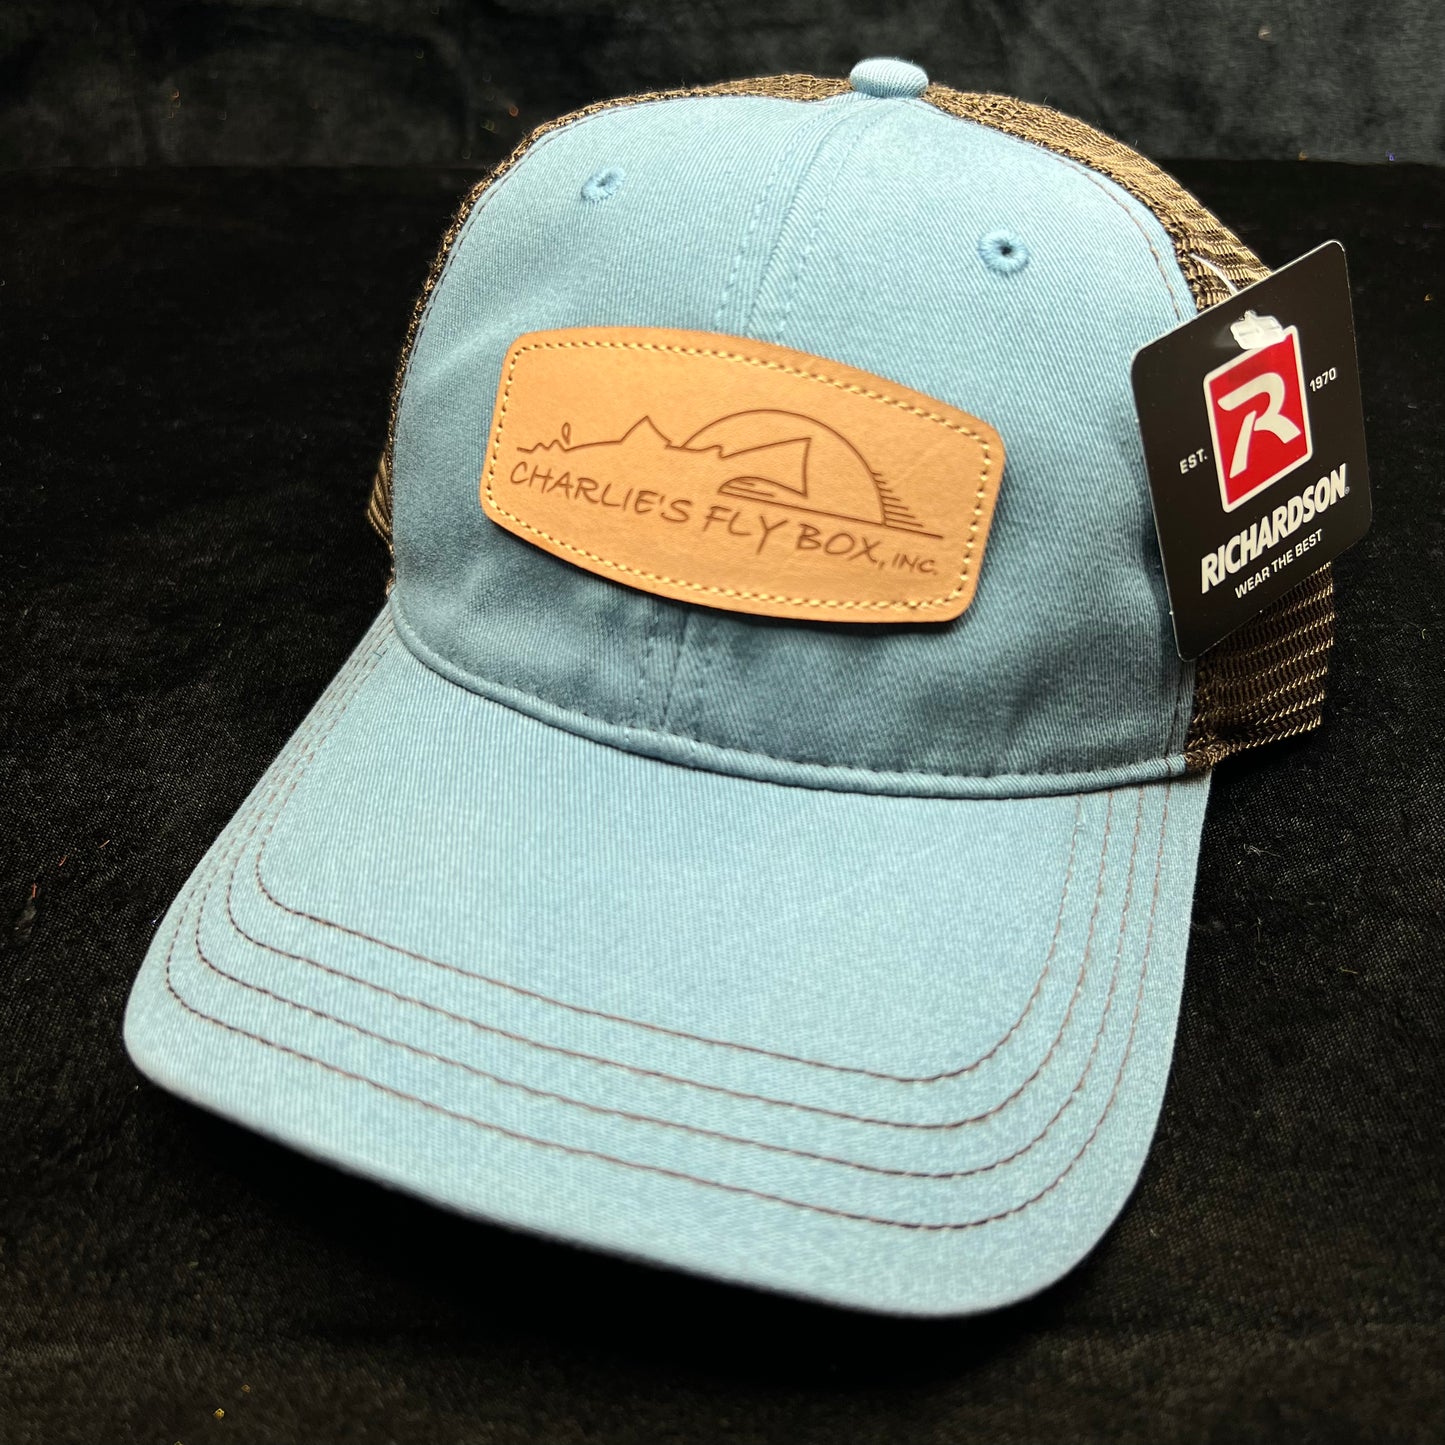 CFB Trucker Hat, Blue/Brown with Leather Patch